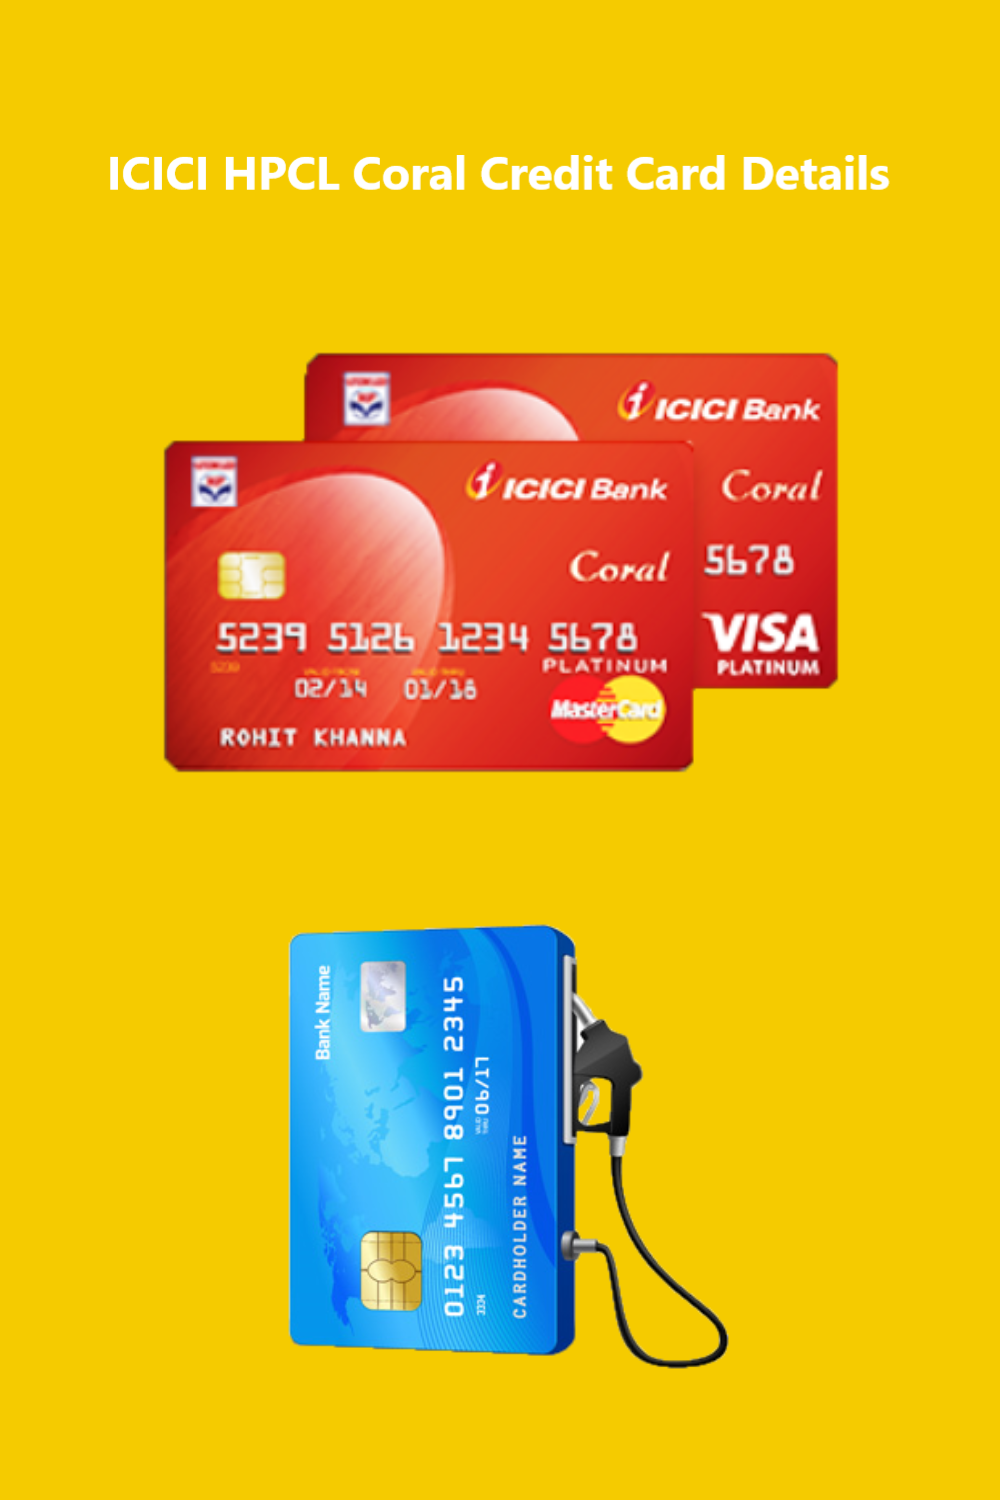 ICICI HPCL Coral Credit Card: Check Offers & Benefits